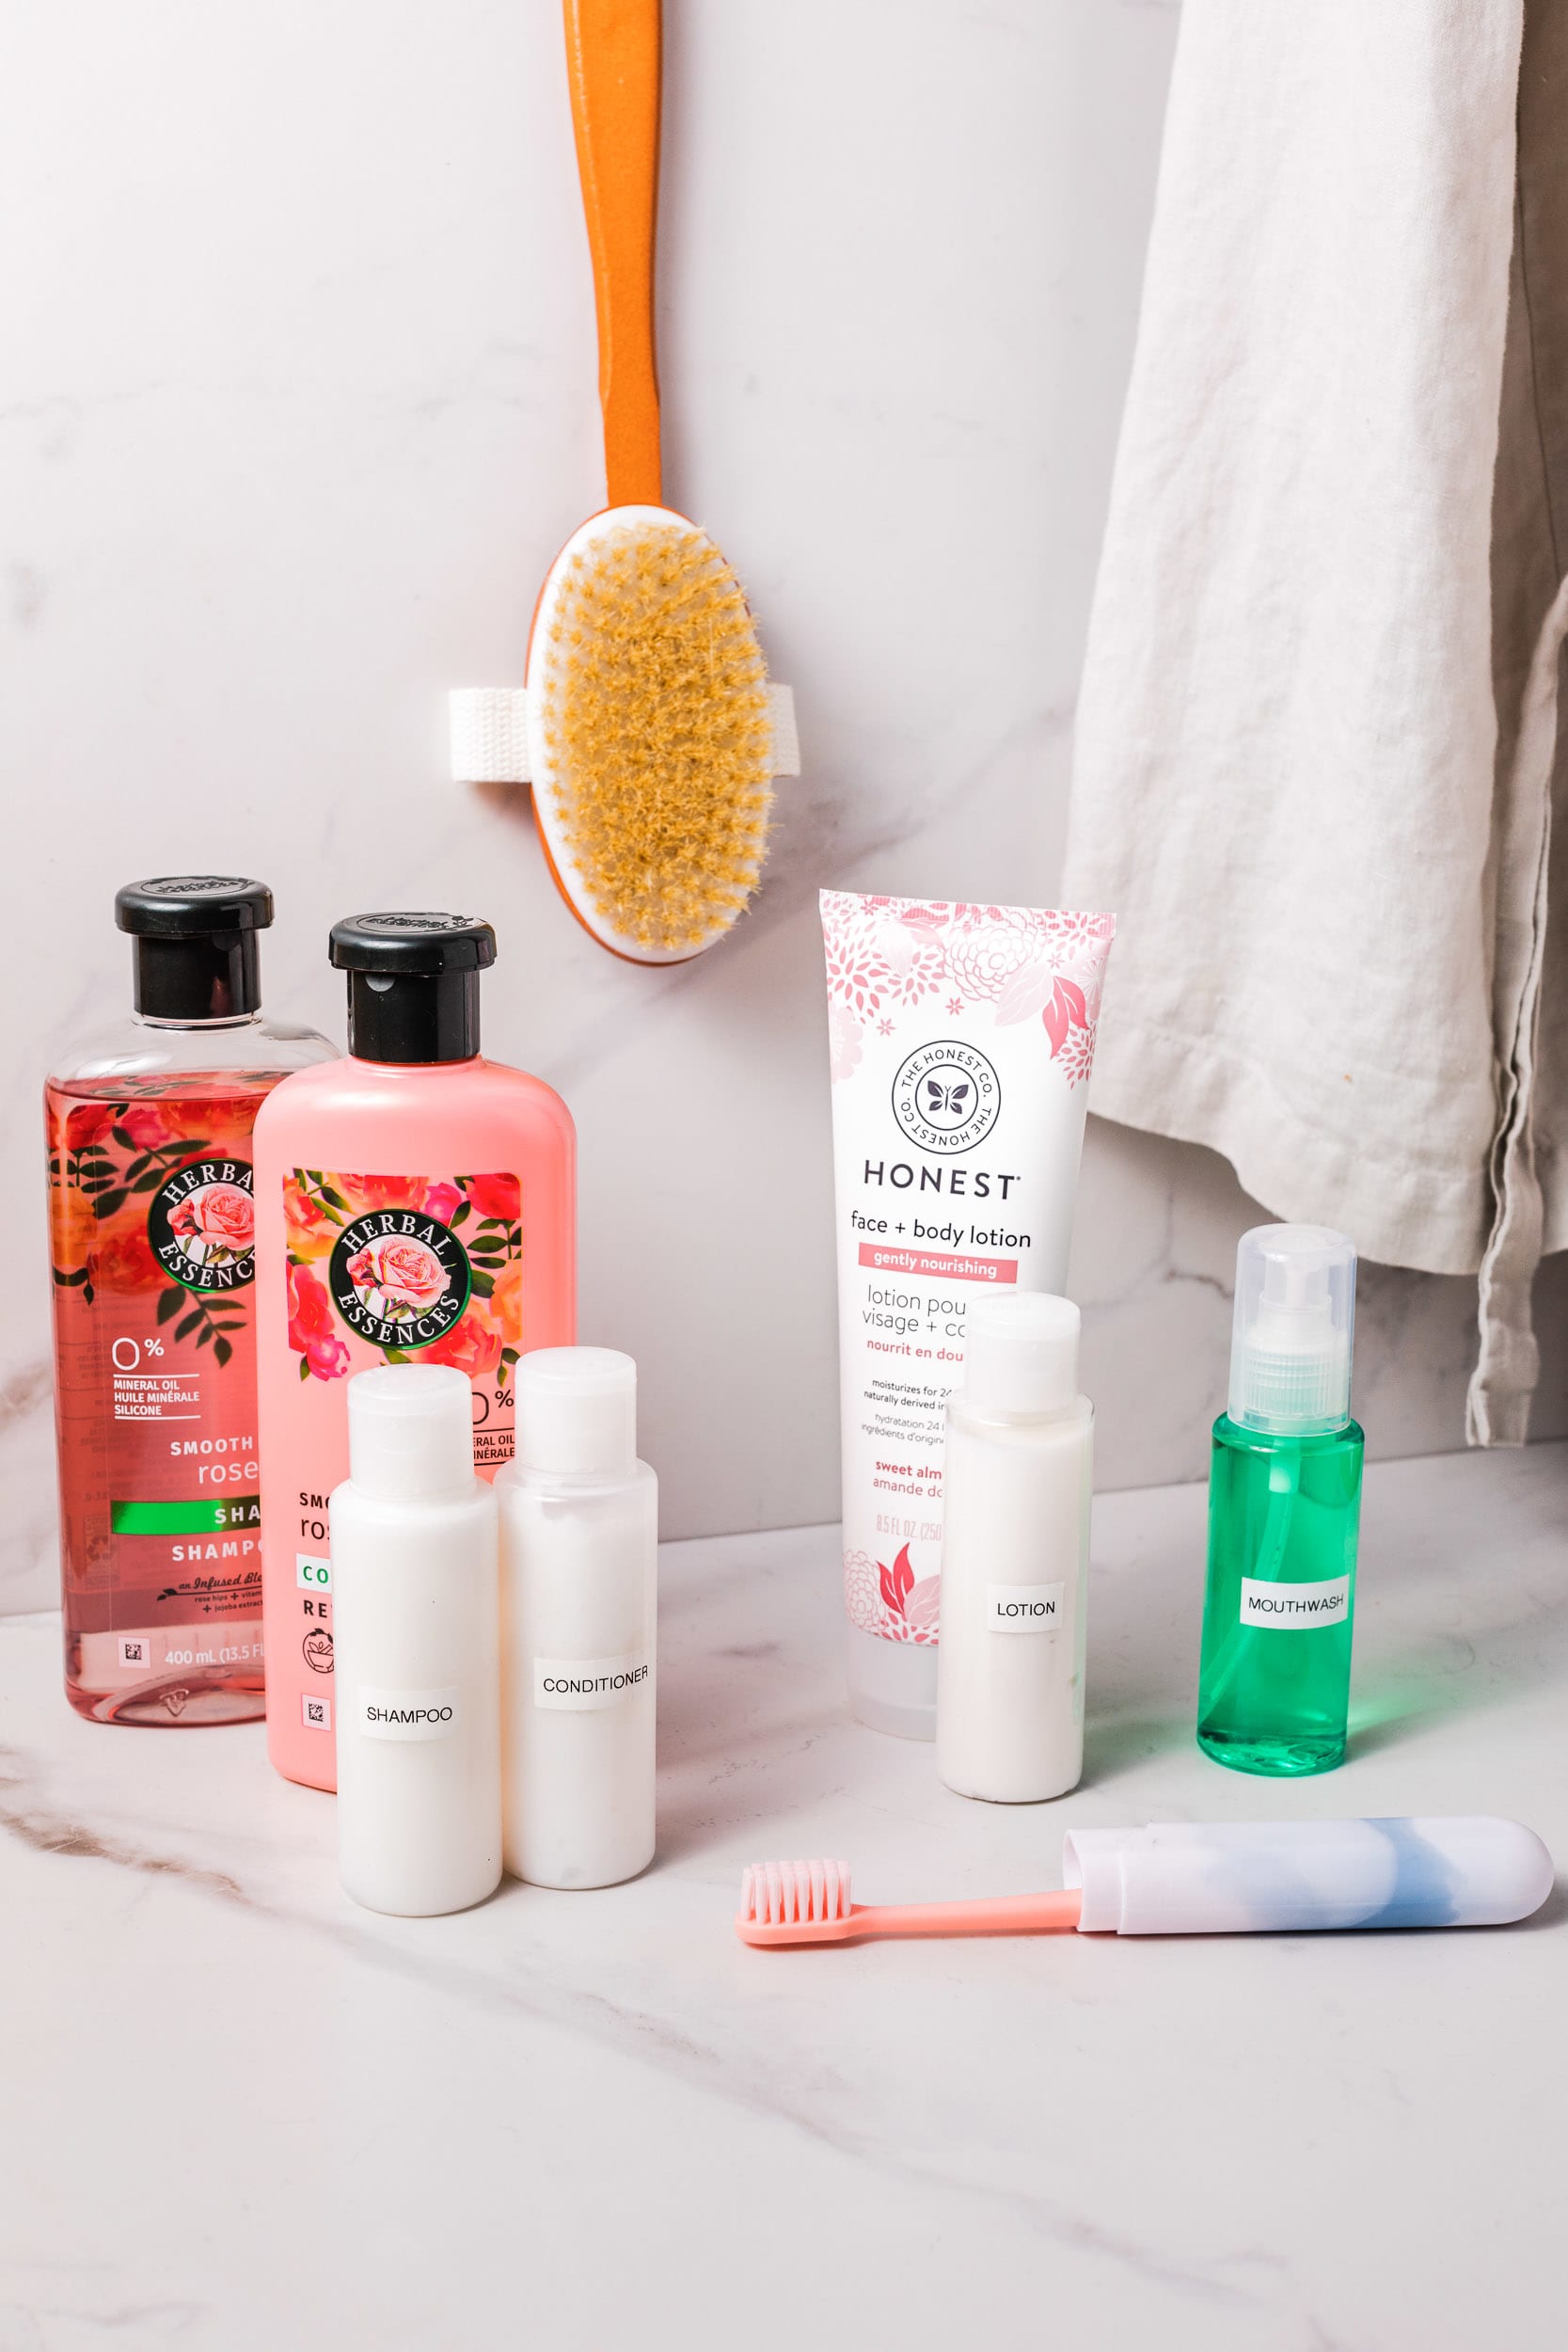 Which is better full size toiletries or travel size when on vacation?